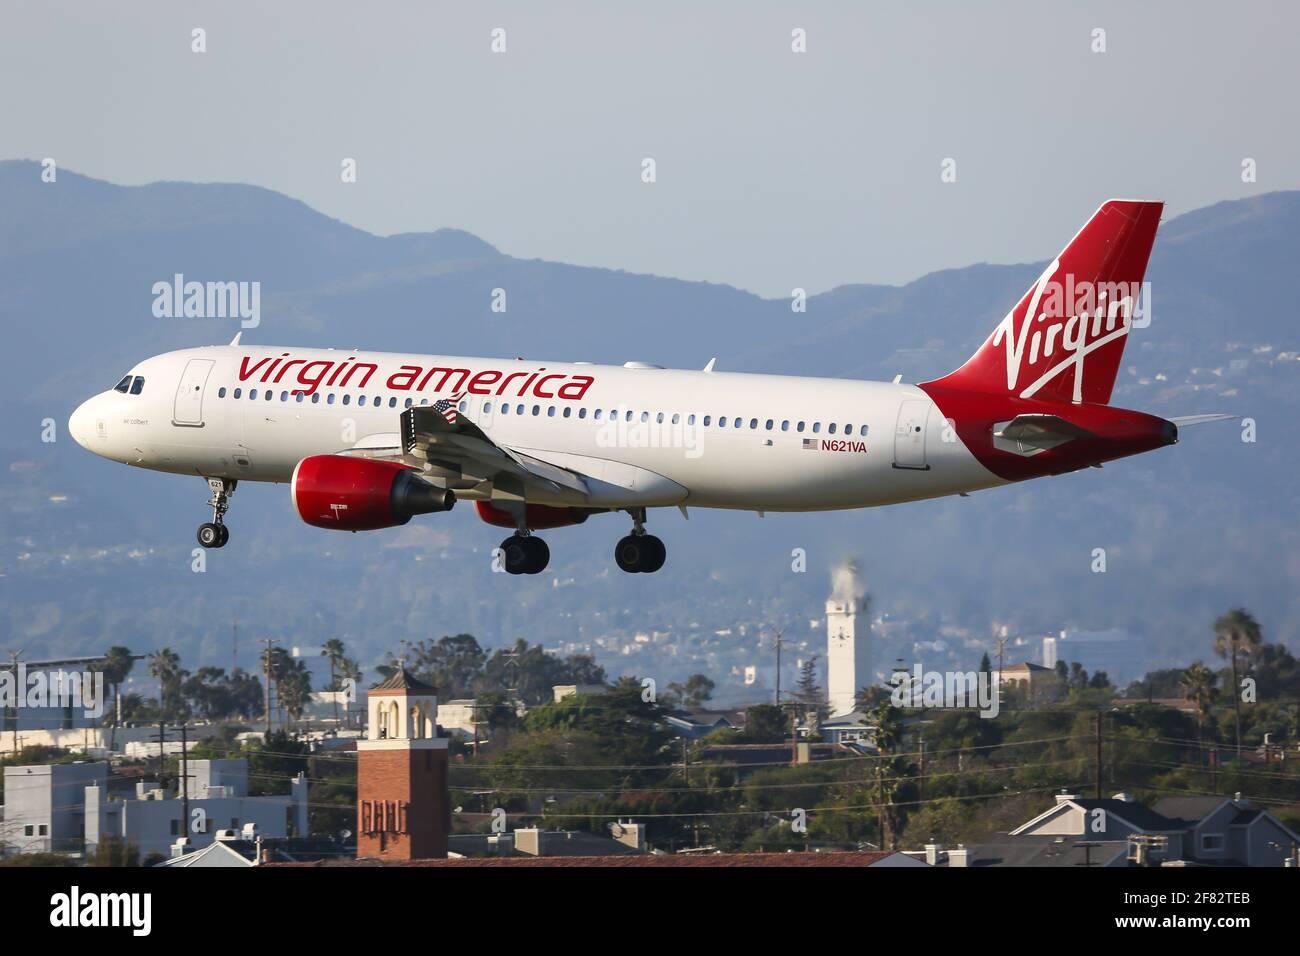 Los Angeles, USA – 20. February 2016: Virgin America Airbus A320 at Los Angeles airport (LAX) in the United States. Stock Photo